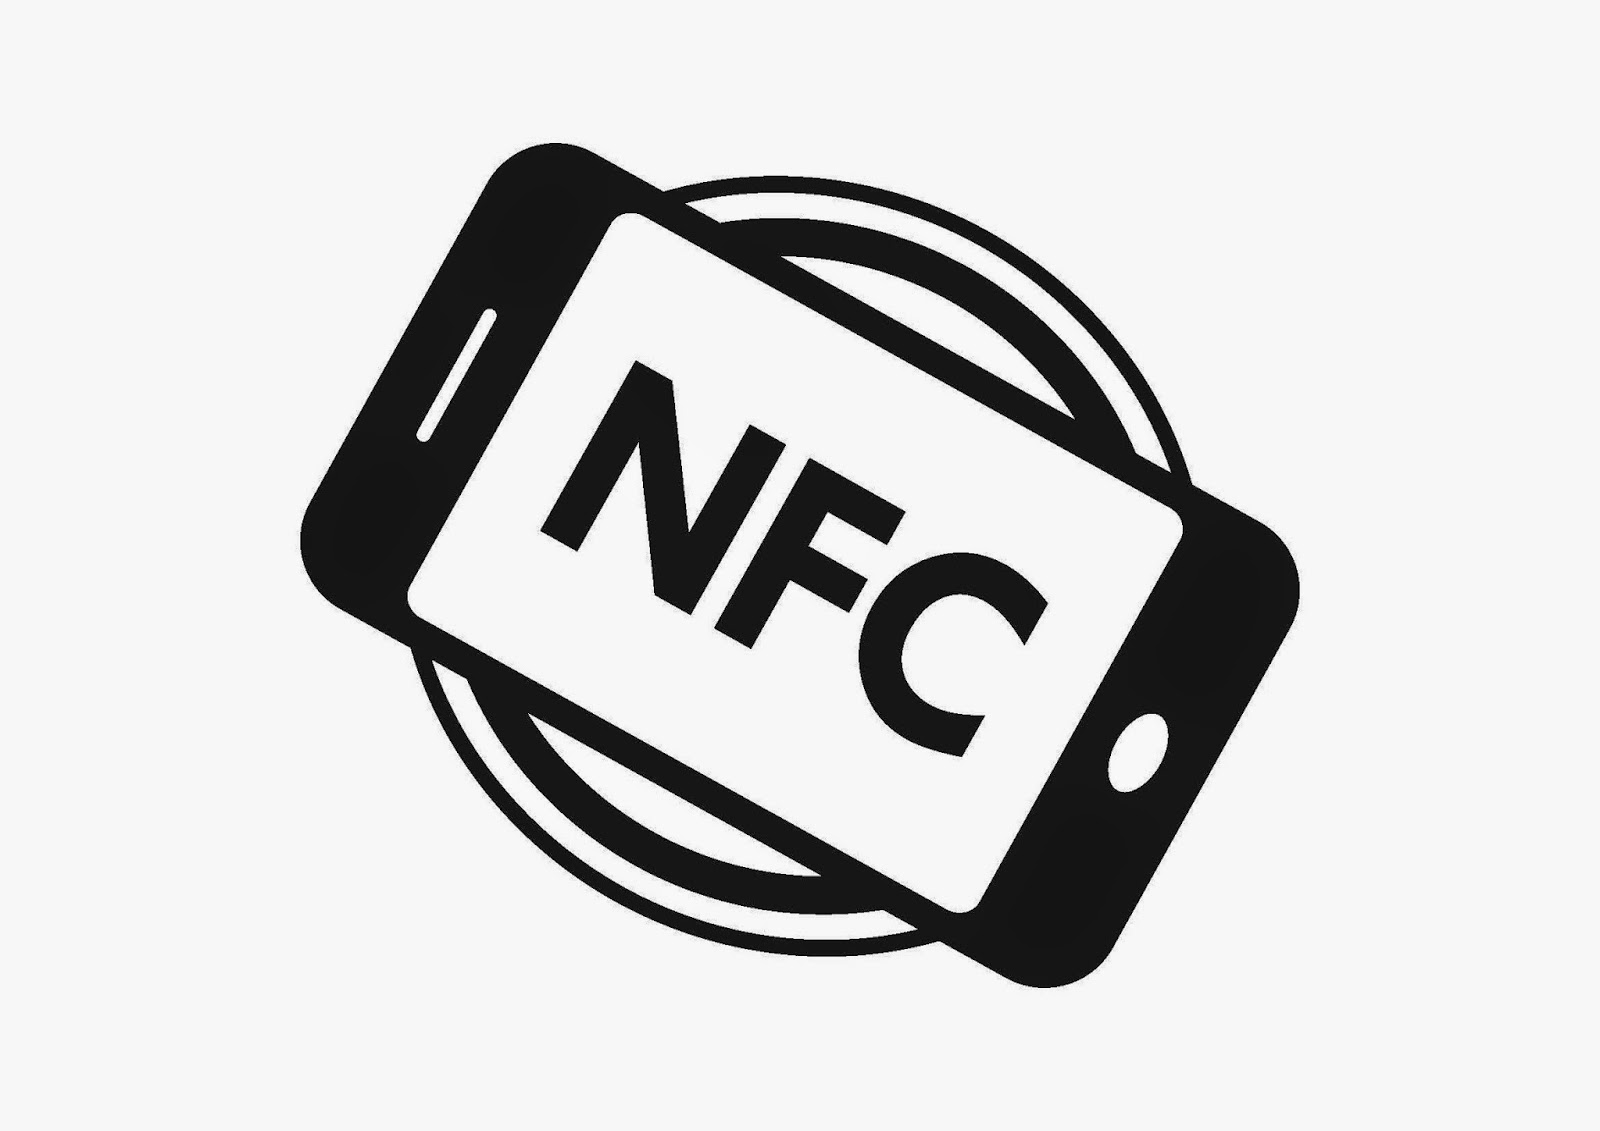 Why NFC Tags : How PearlCBD Is Leveraging Tech To Foster Trust With Our Customers